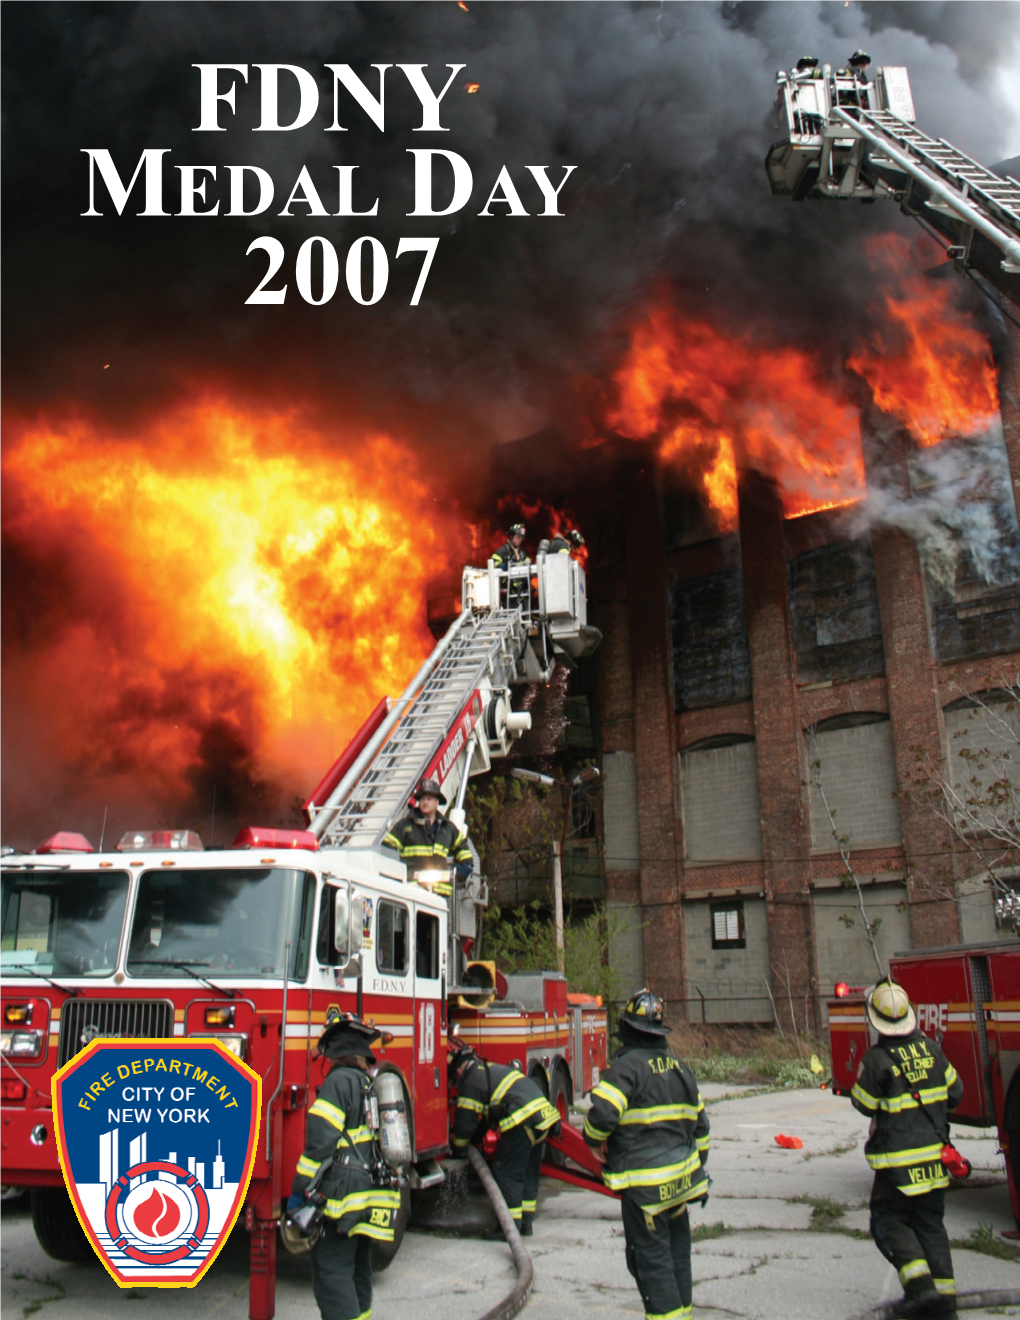 FDNY MEDAL DAY 2007 New York’S Bravest PROUDLY SERVING SINCE 1865